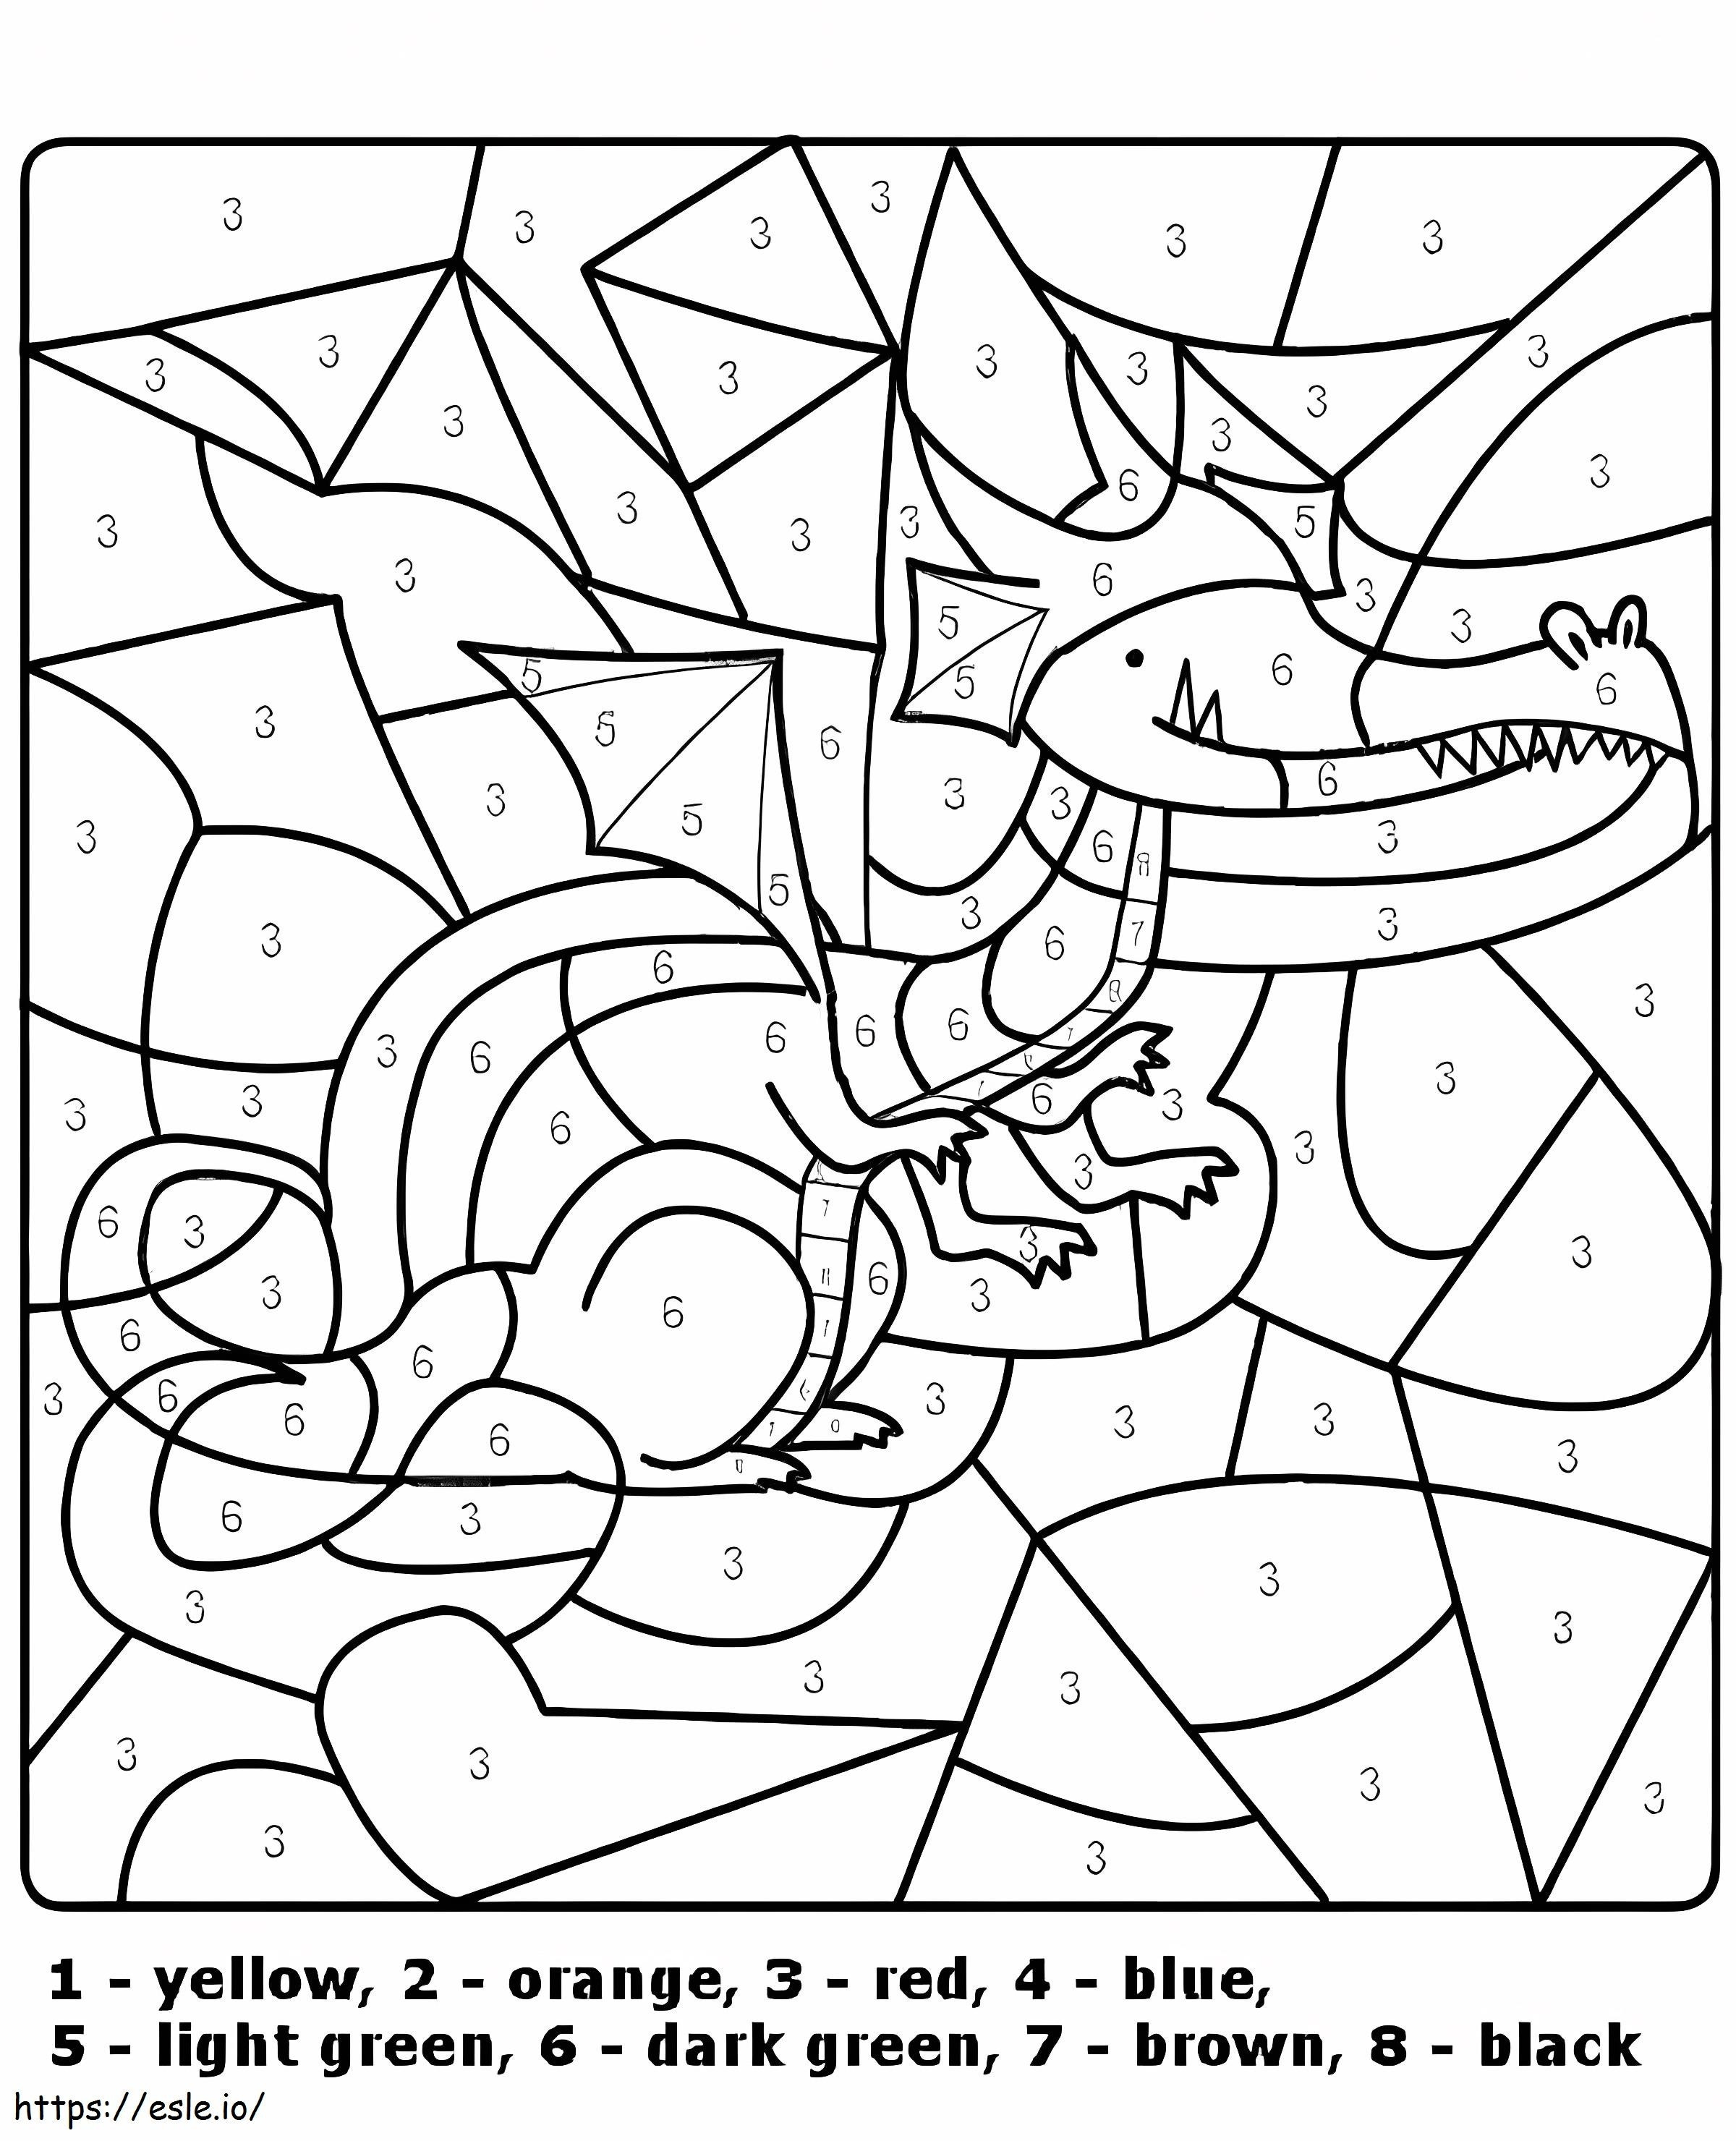 Funny Dragon Color By Number coloring page